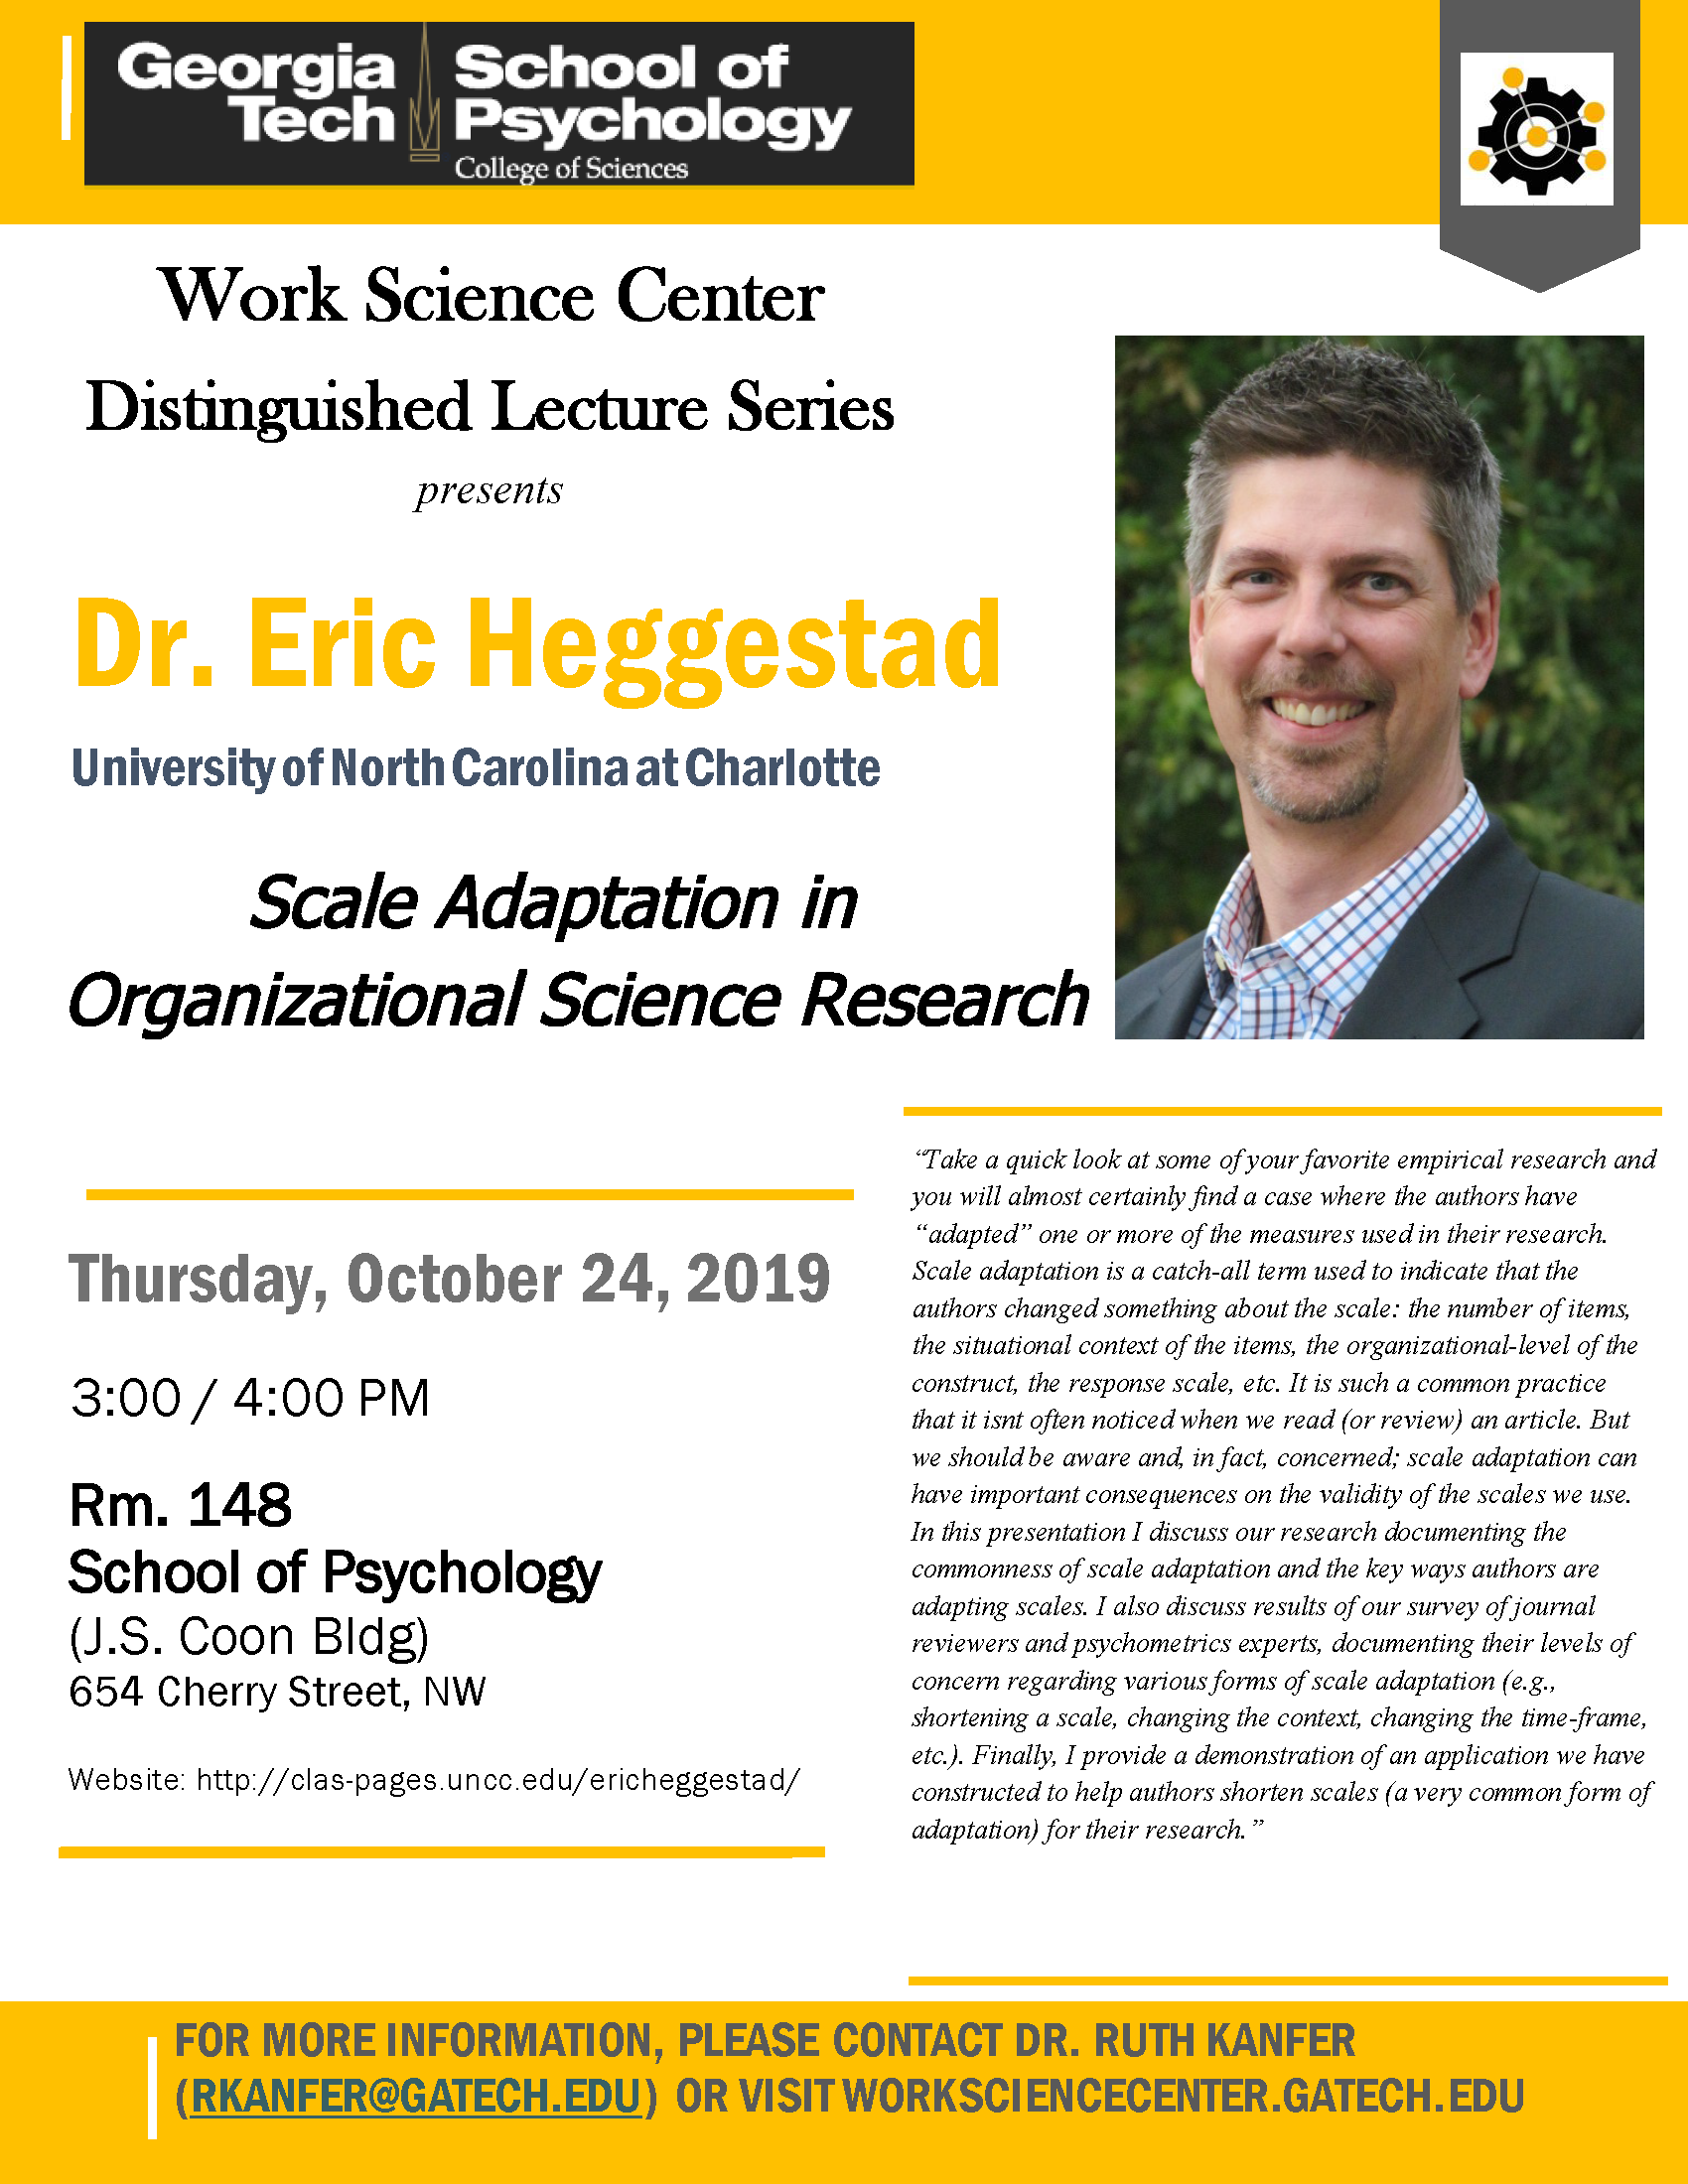 Distinguished lecture by Eric Heggestad